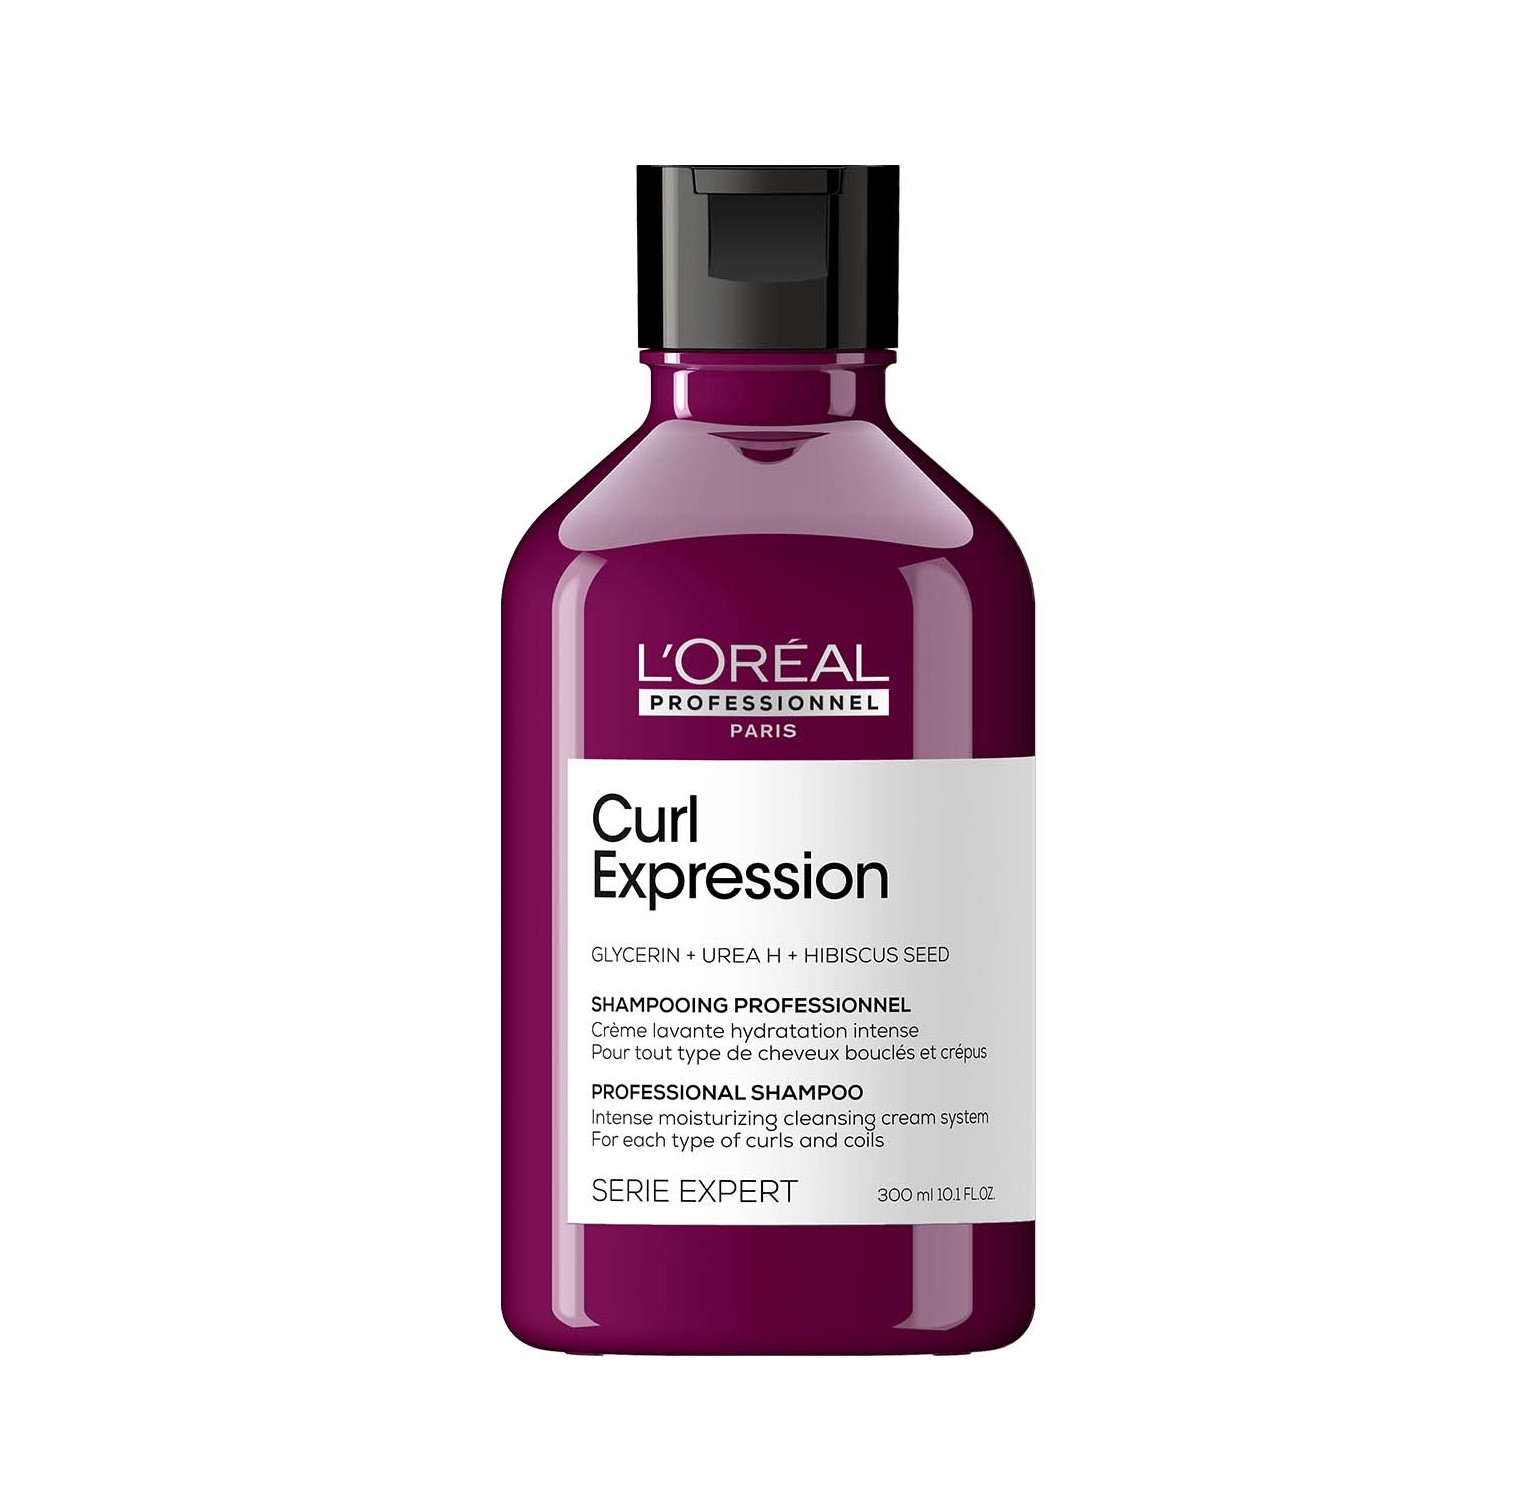 L'Oreal Professionnel Curl Expression Intense Moisturizing Cleansing Cream 300ml